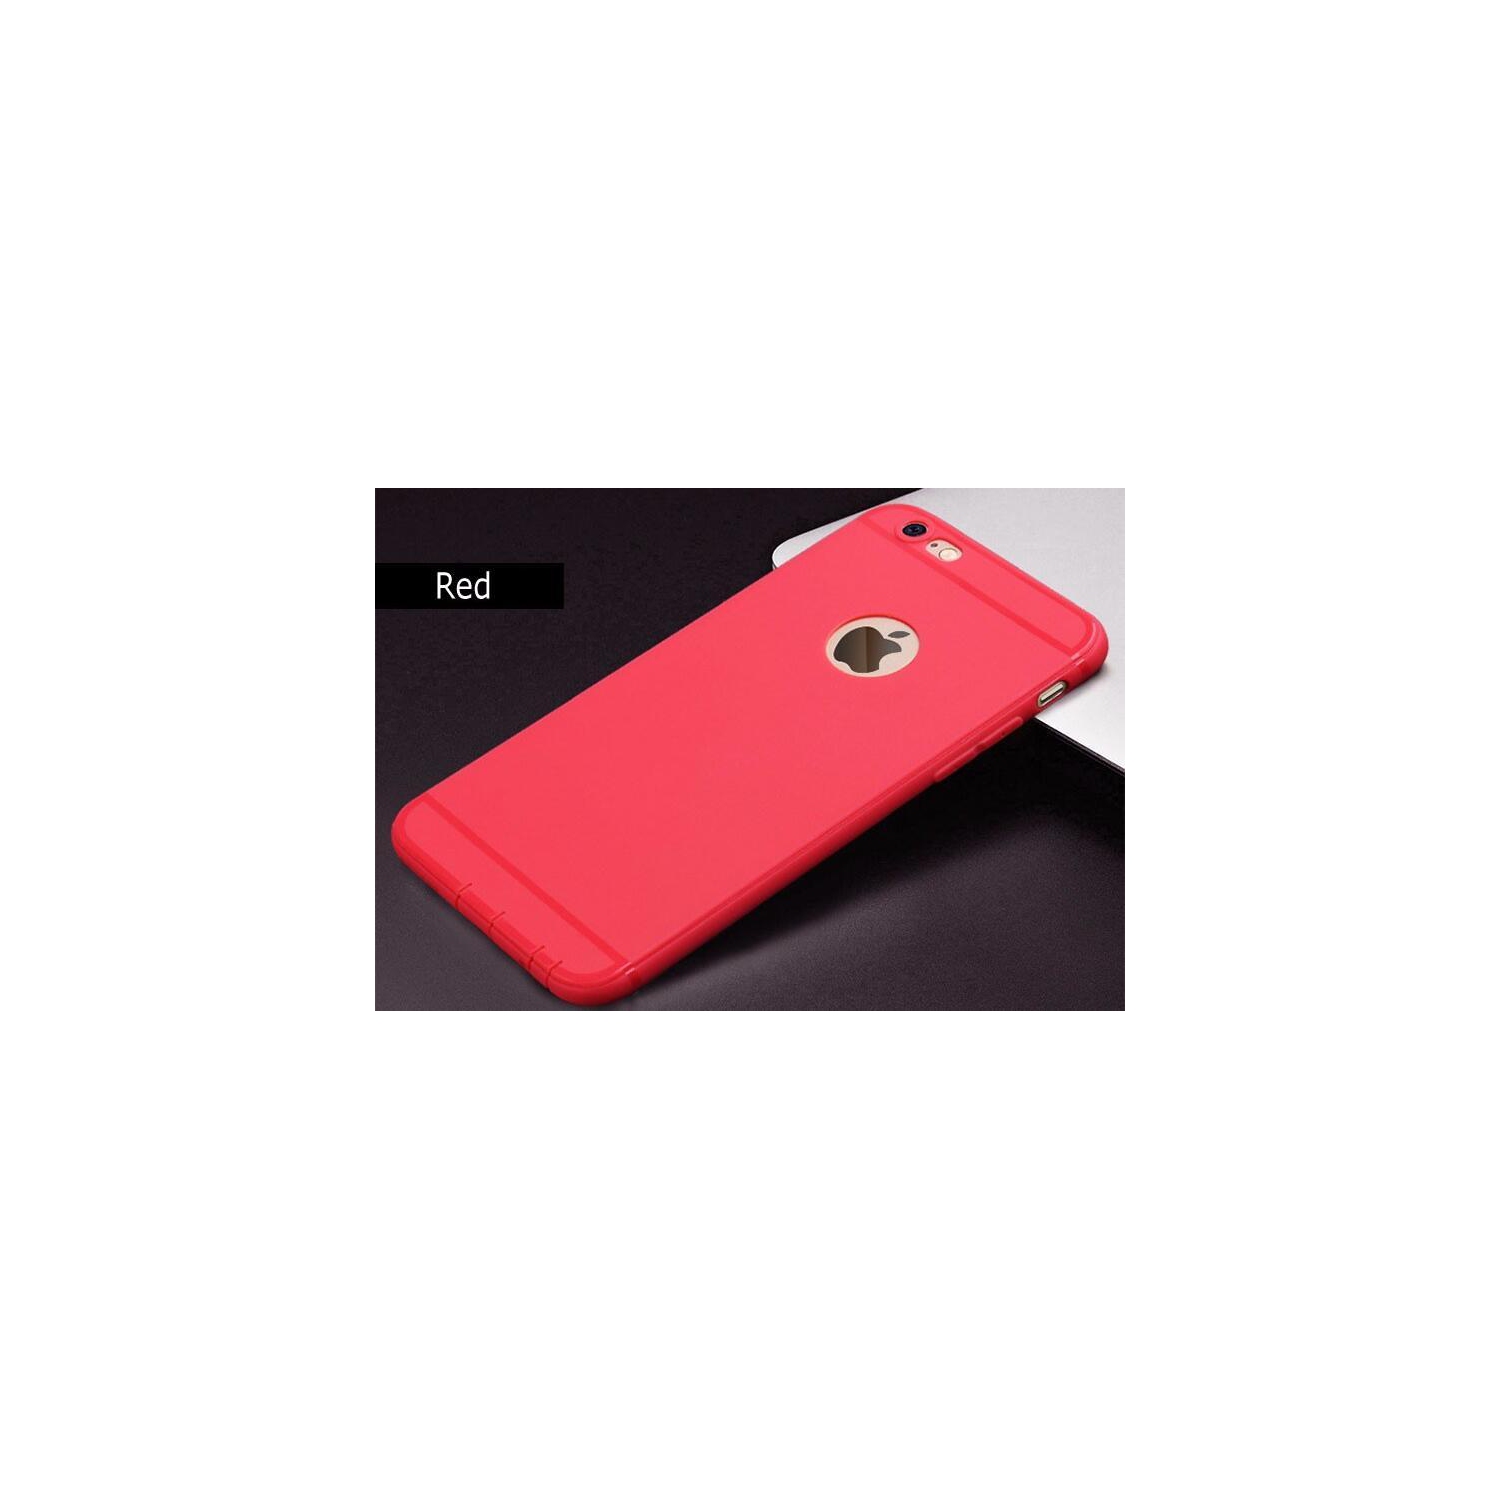 Ultra-Thin Matte Frosted Soft TPU Phone Case Candy Silicone Shockproof Cover For iPhone 7 Plus / 8 Plus (Red)